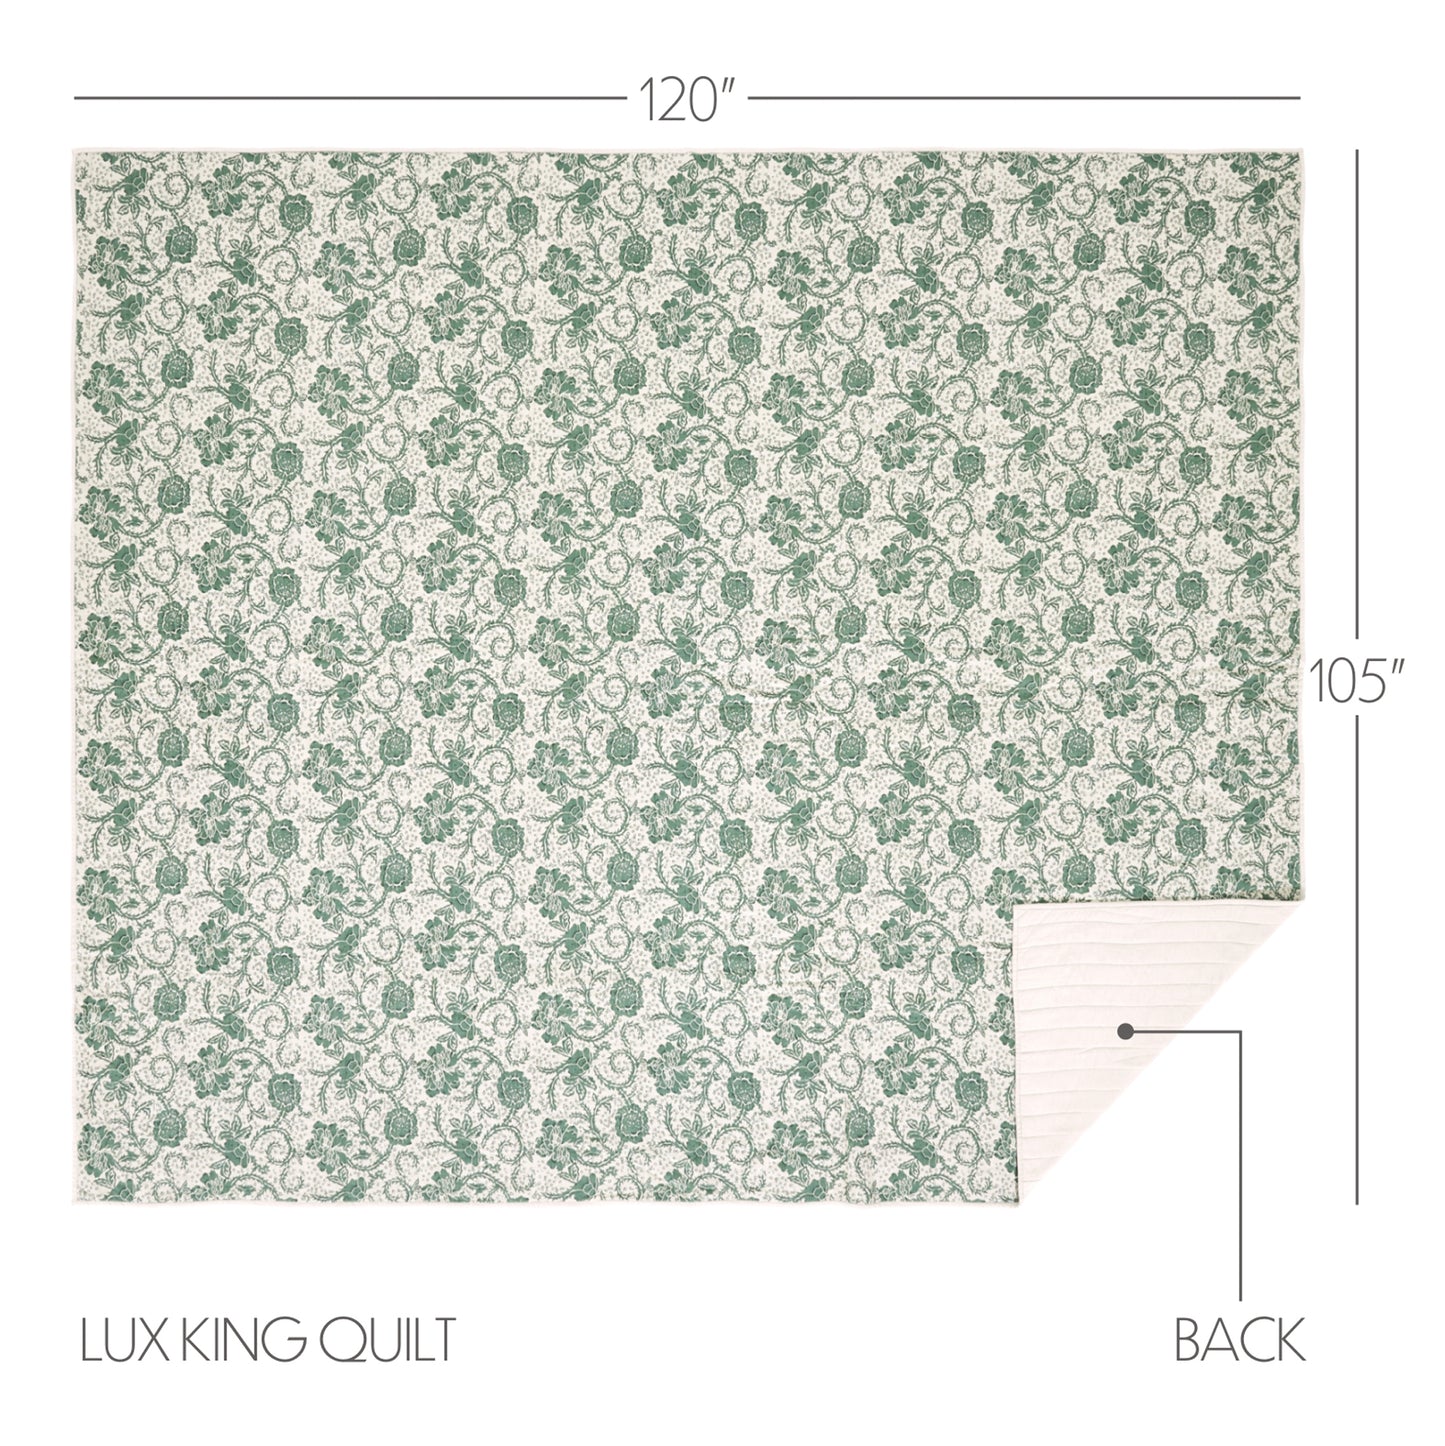 81210-Dorset-Green-Floral-Luxury-King-Quilt-120WX105L-image-1